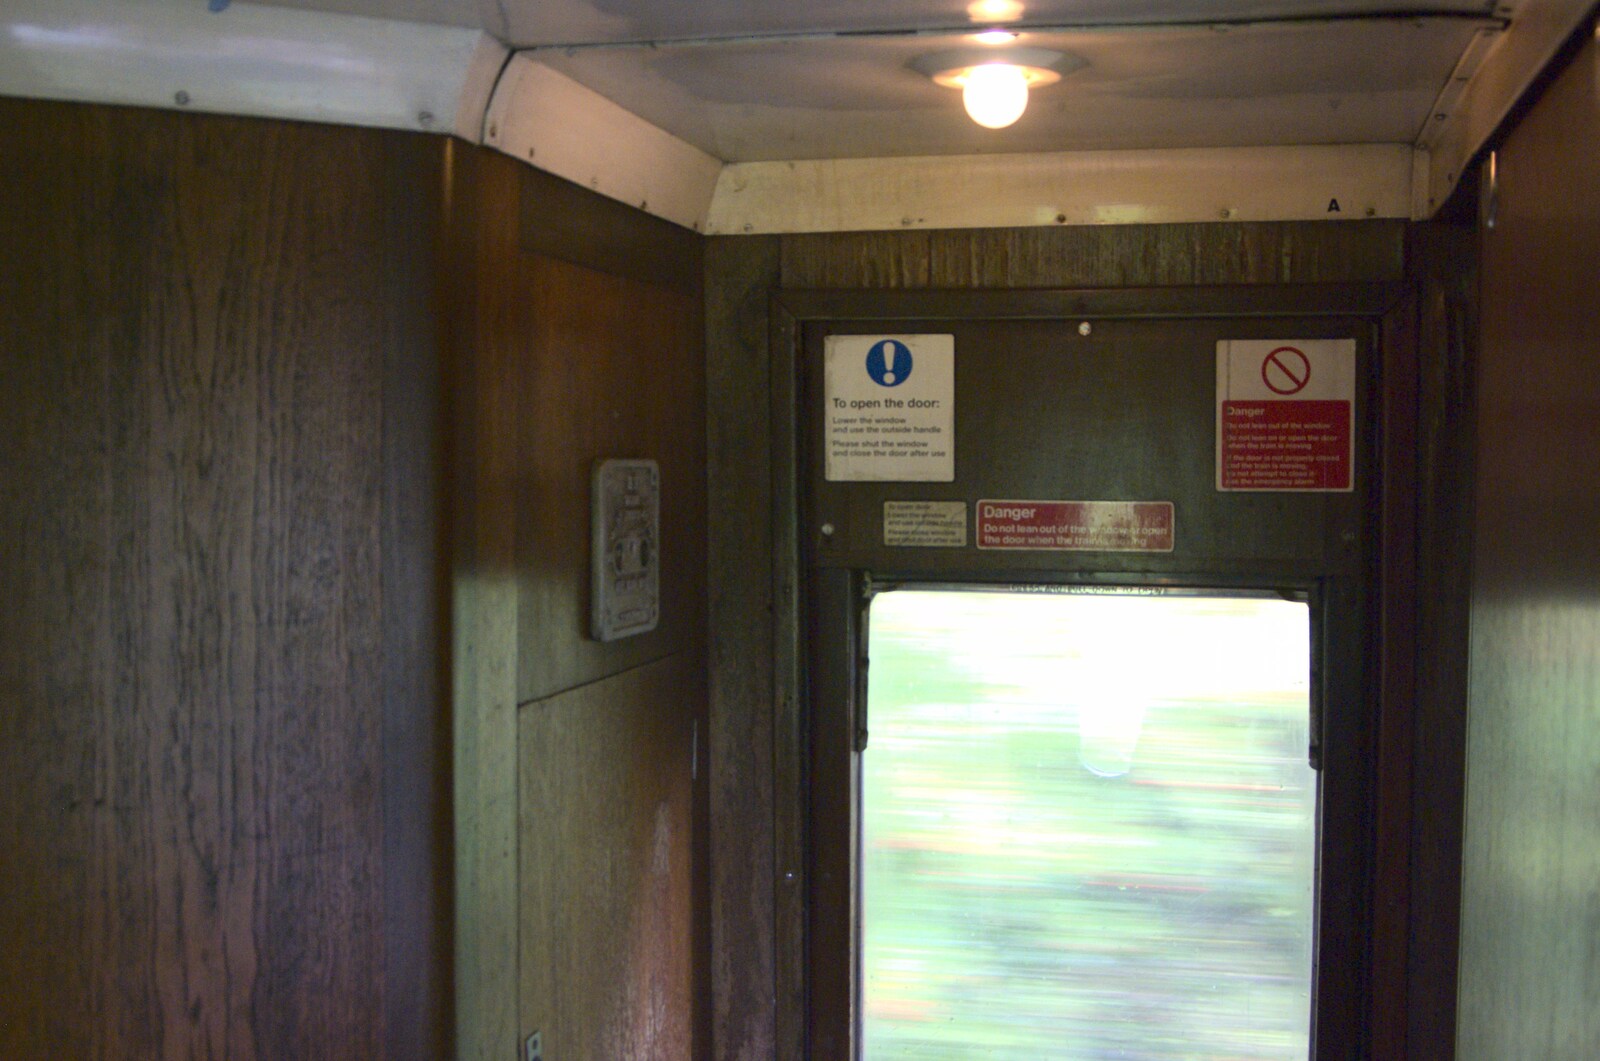 Camping with Trains, Yaxham, Norfolk - 29th August 2010: 1980s train vestibule. It seemed modern at the time